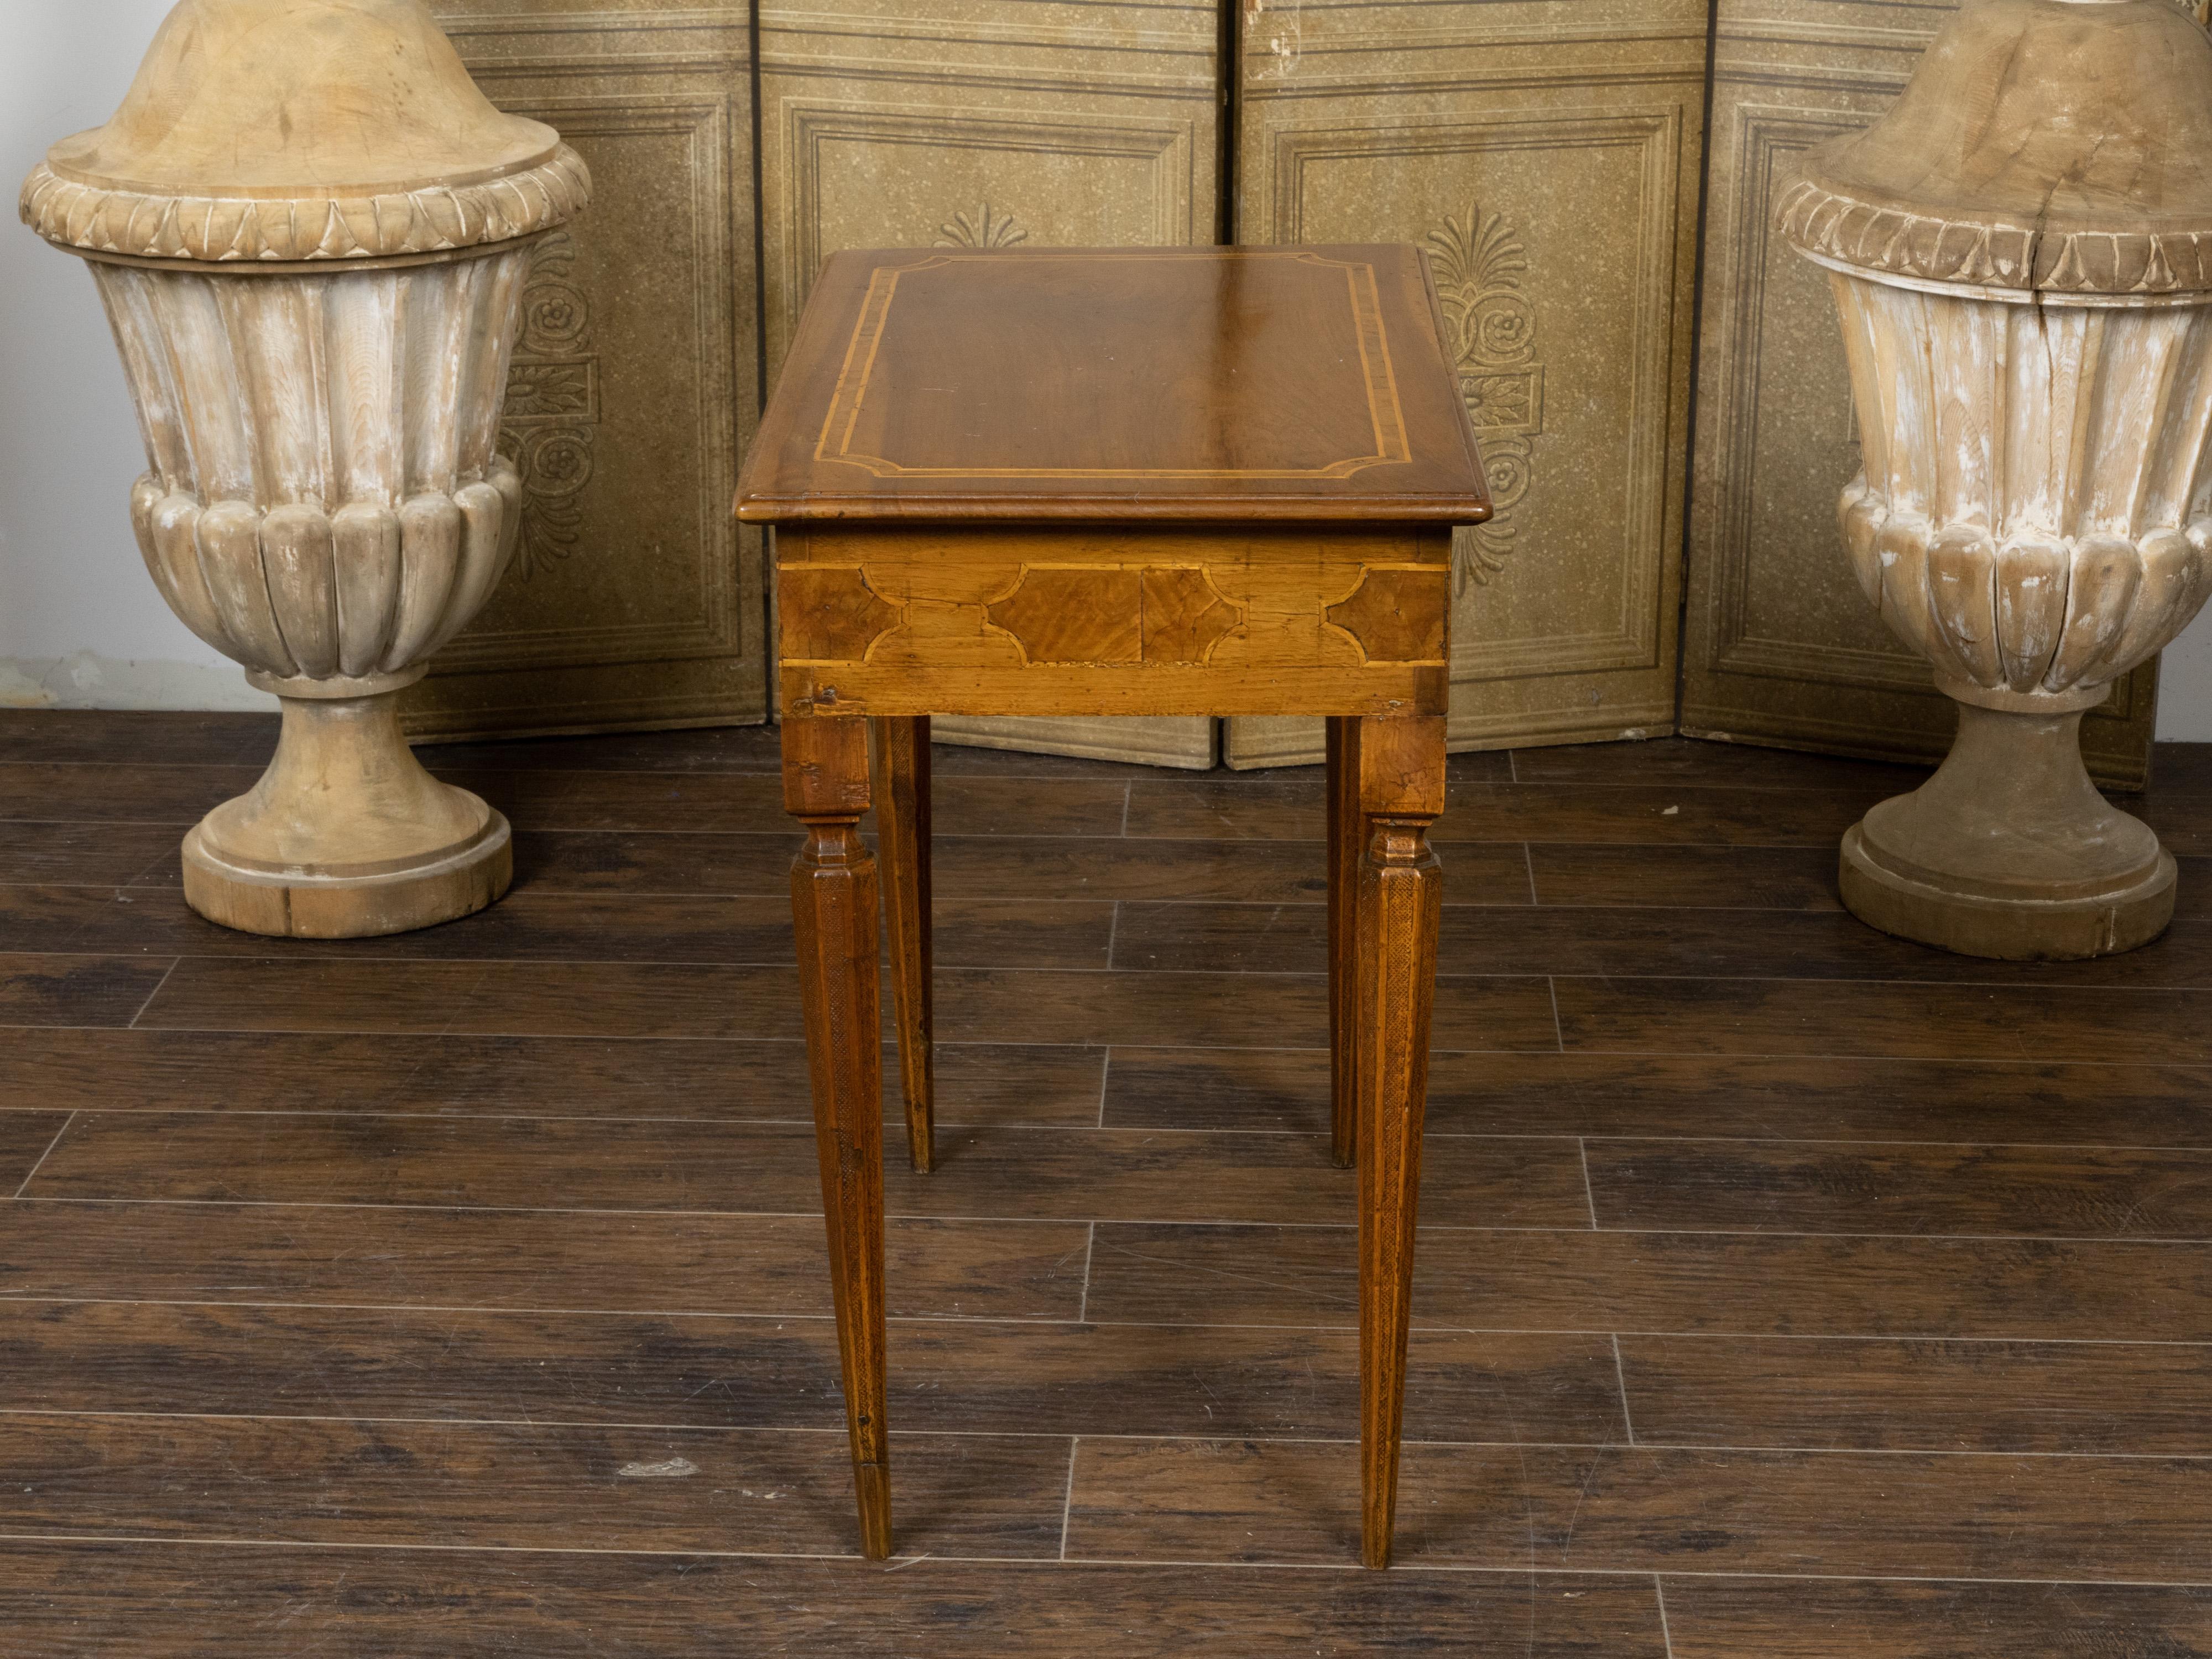 Italian Neoclassical Period 18th Century Walnut Console Table with Cross Banding In Good Condition For Sale In Atlanta, GA